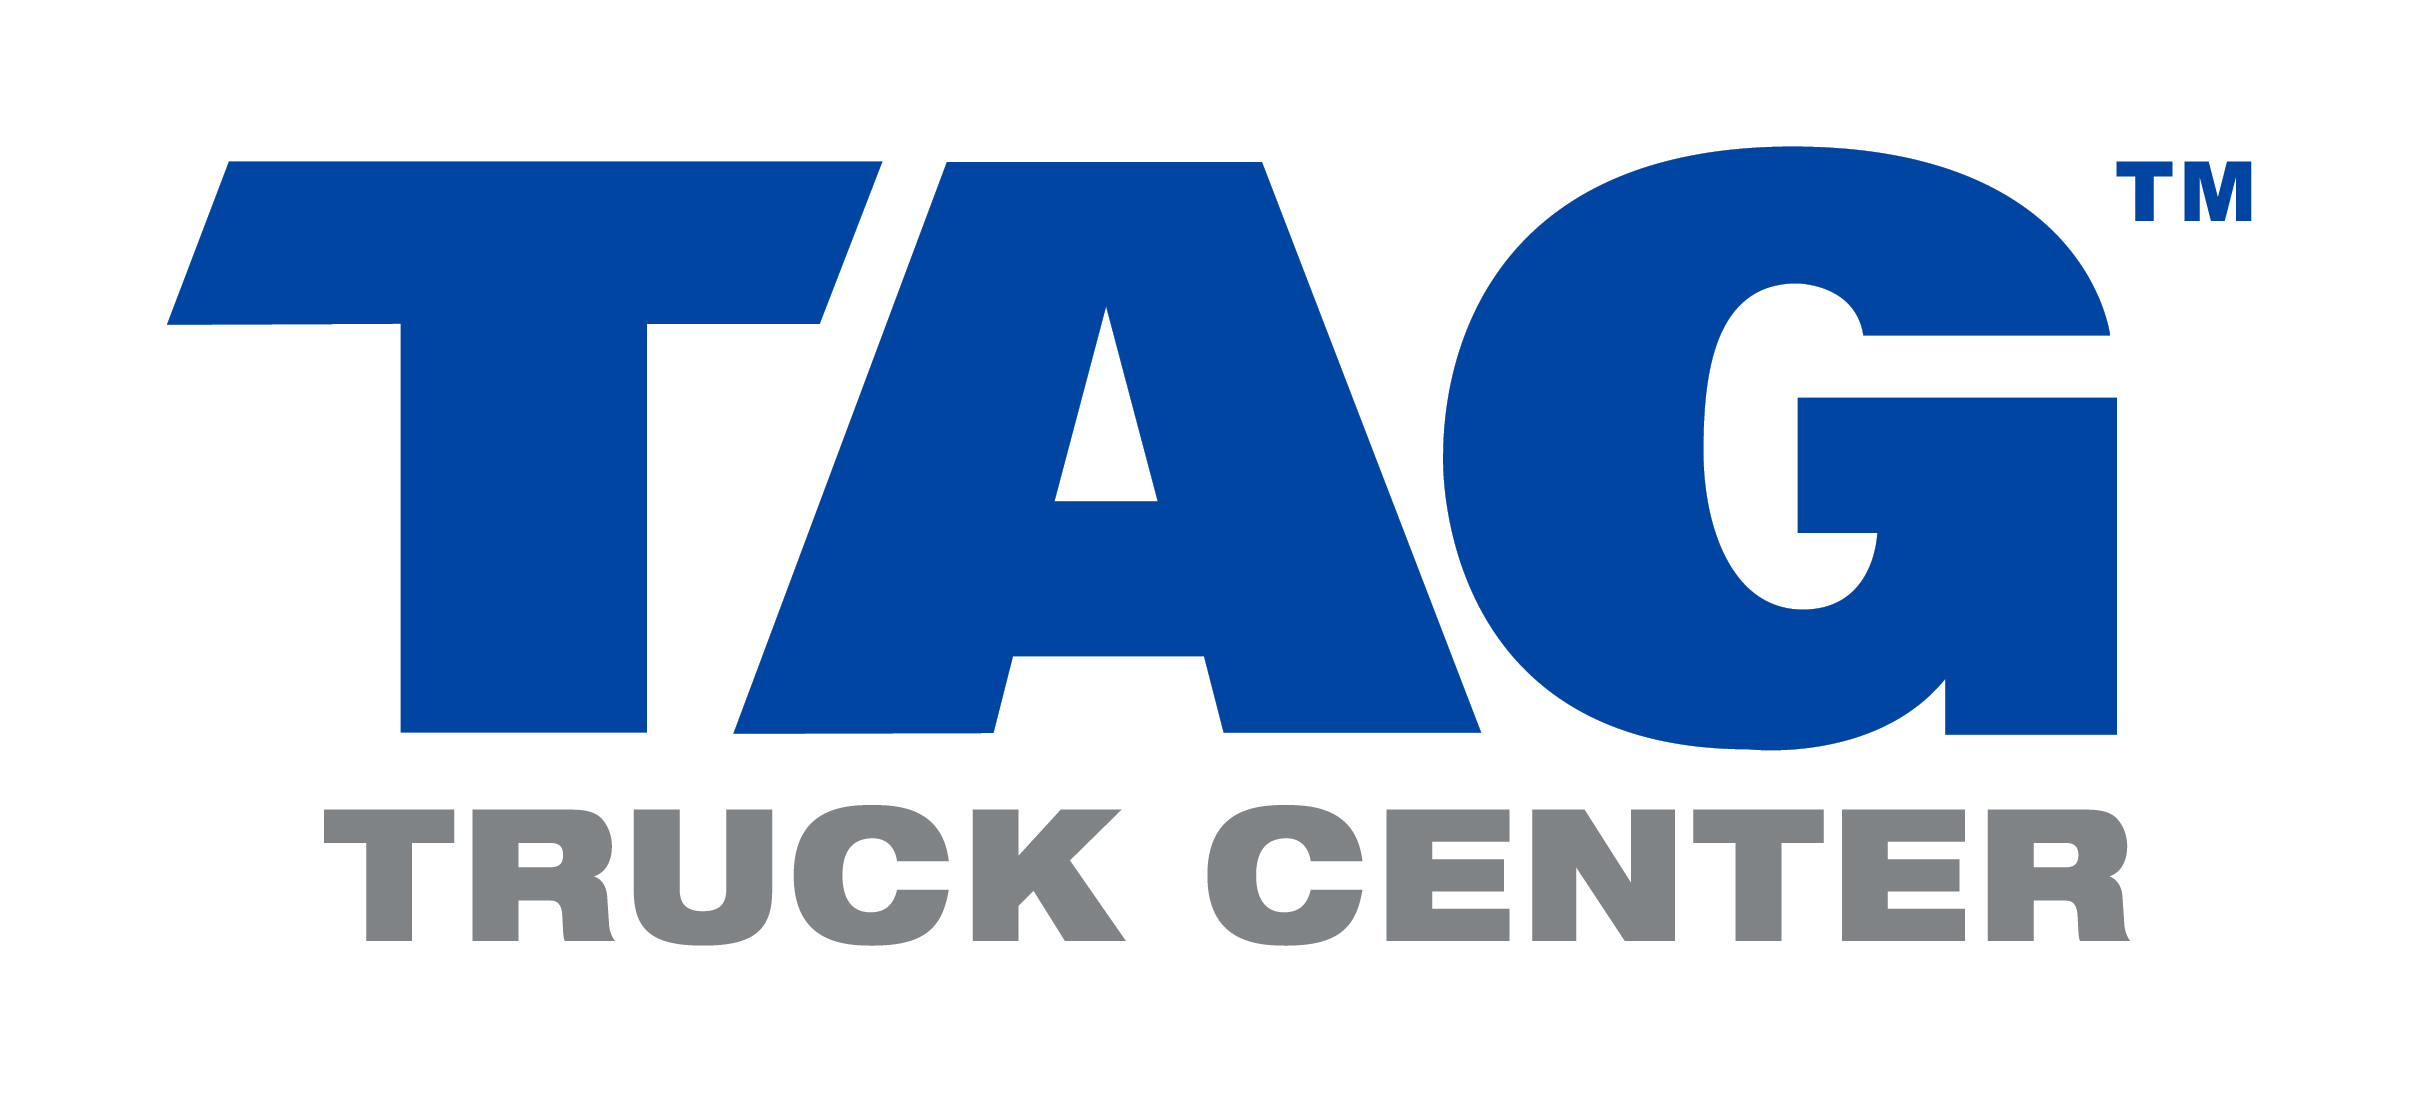 3TAG Truck Center